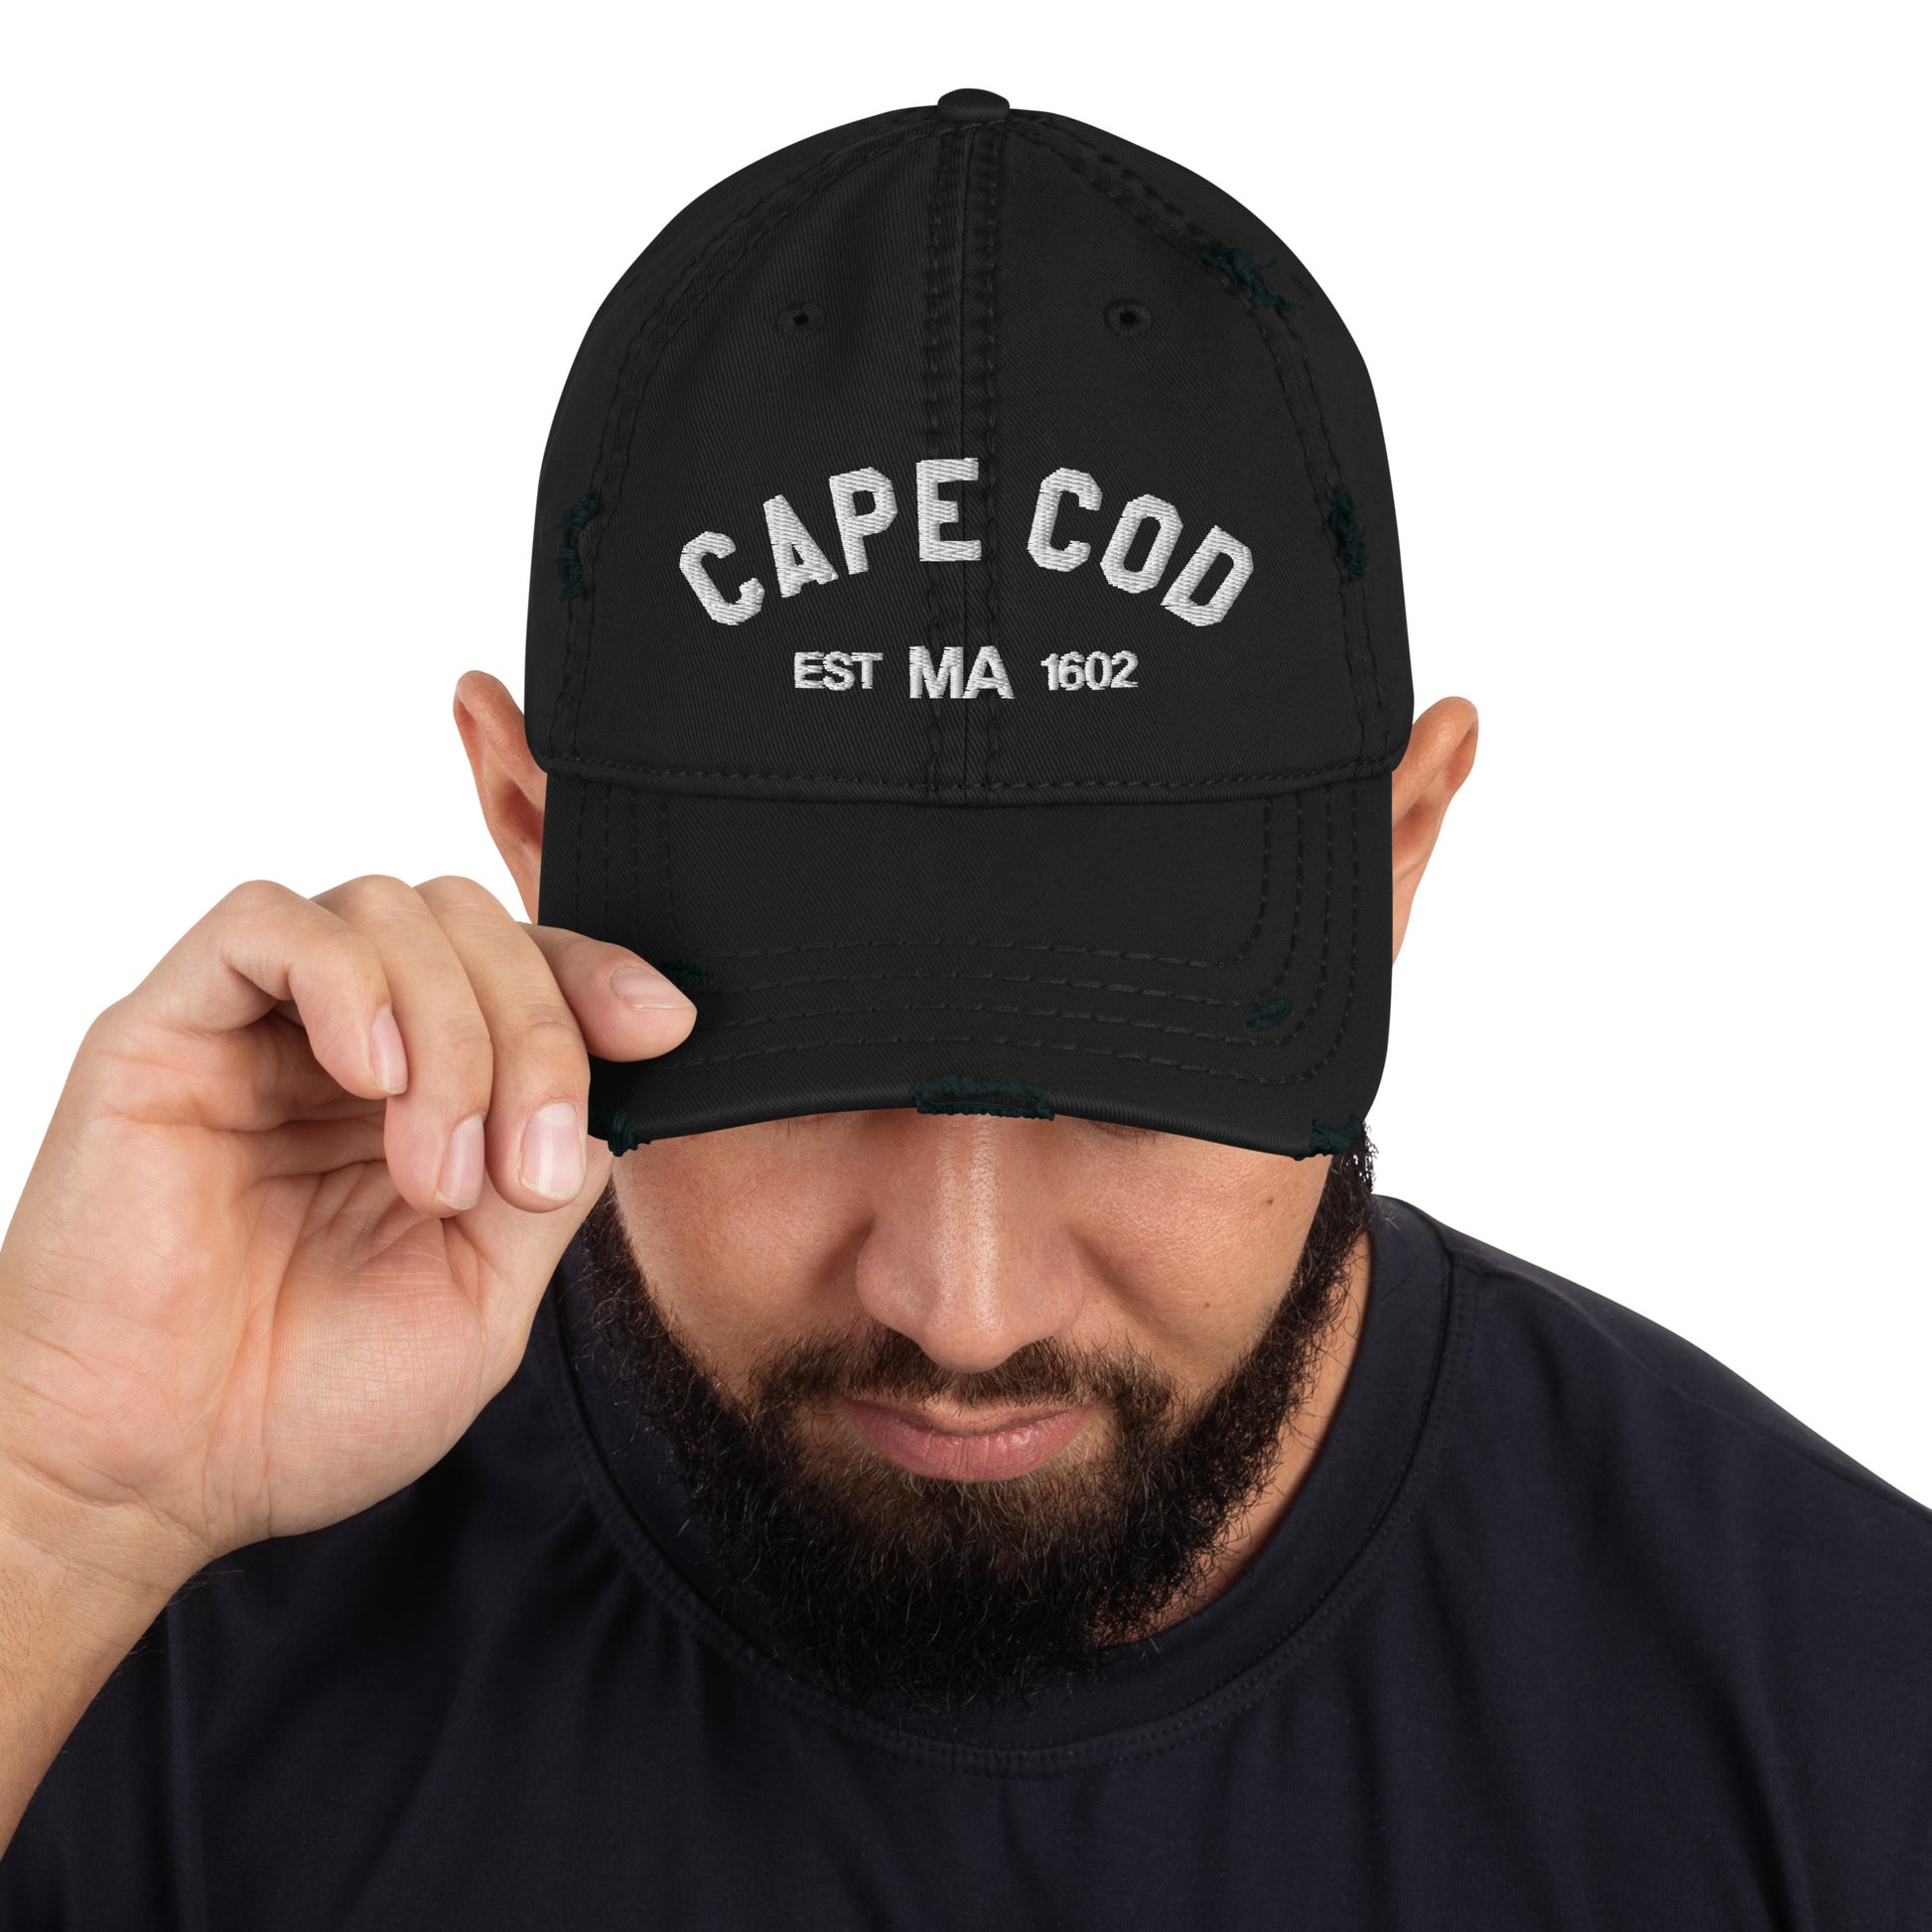 Cape Cod Baseball Hat Cap, Ma Massachusetts Distressed Dad Mom Trucker Men Women Embroidery Embroidered Beach Boating Hat Charcoal Grey